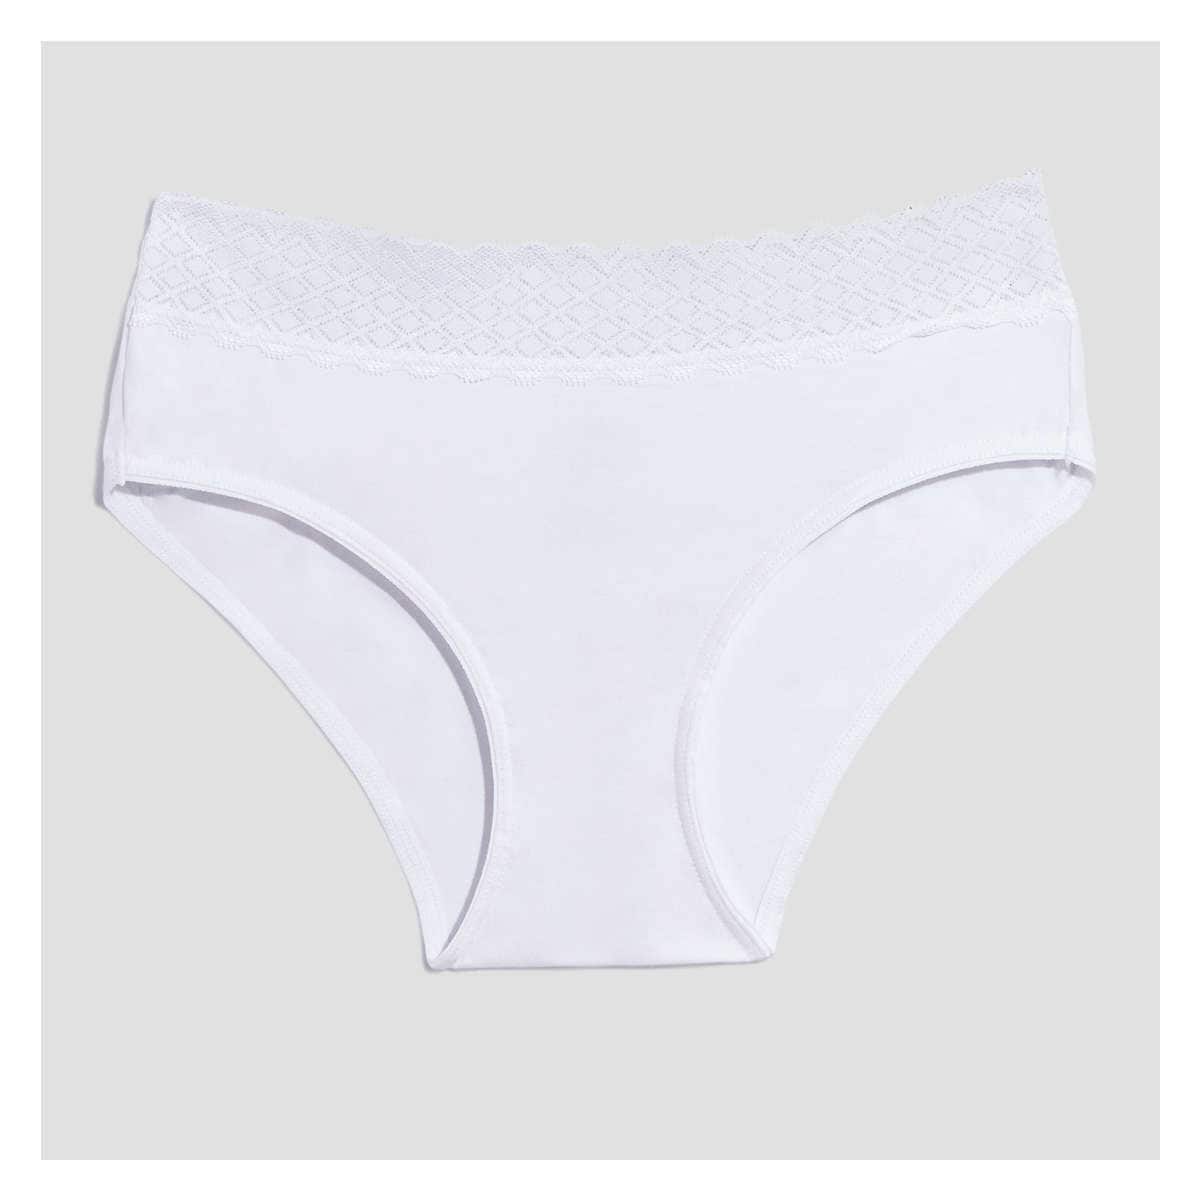 John Lewis ANYDAY Lace Trim Thongs, Pack of 3, White, 8